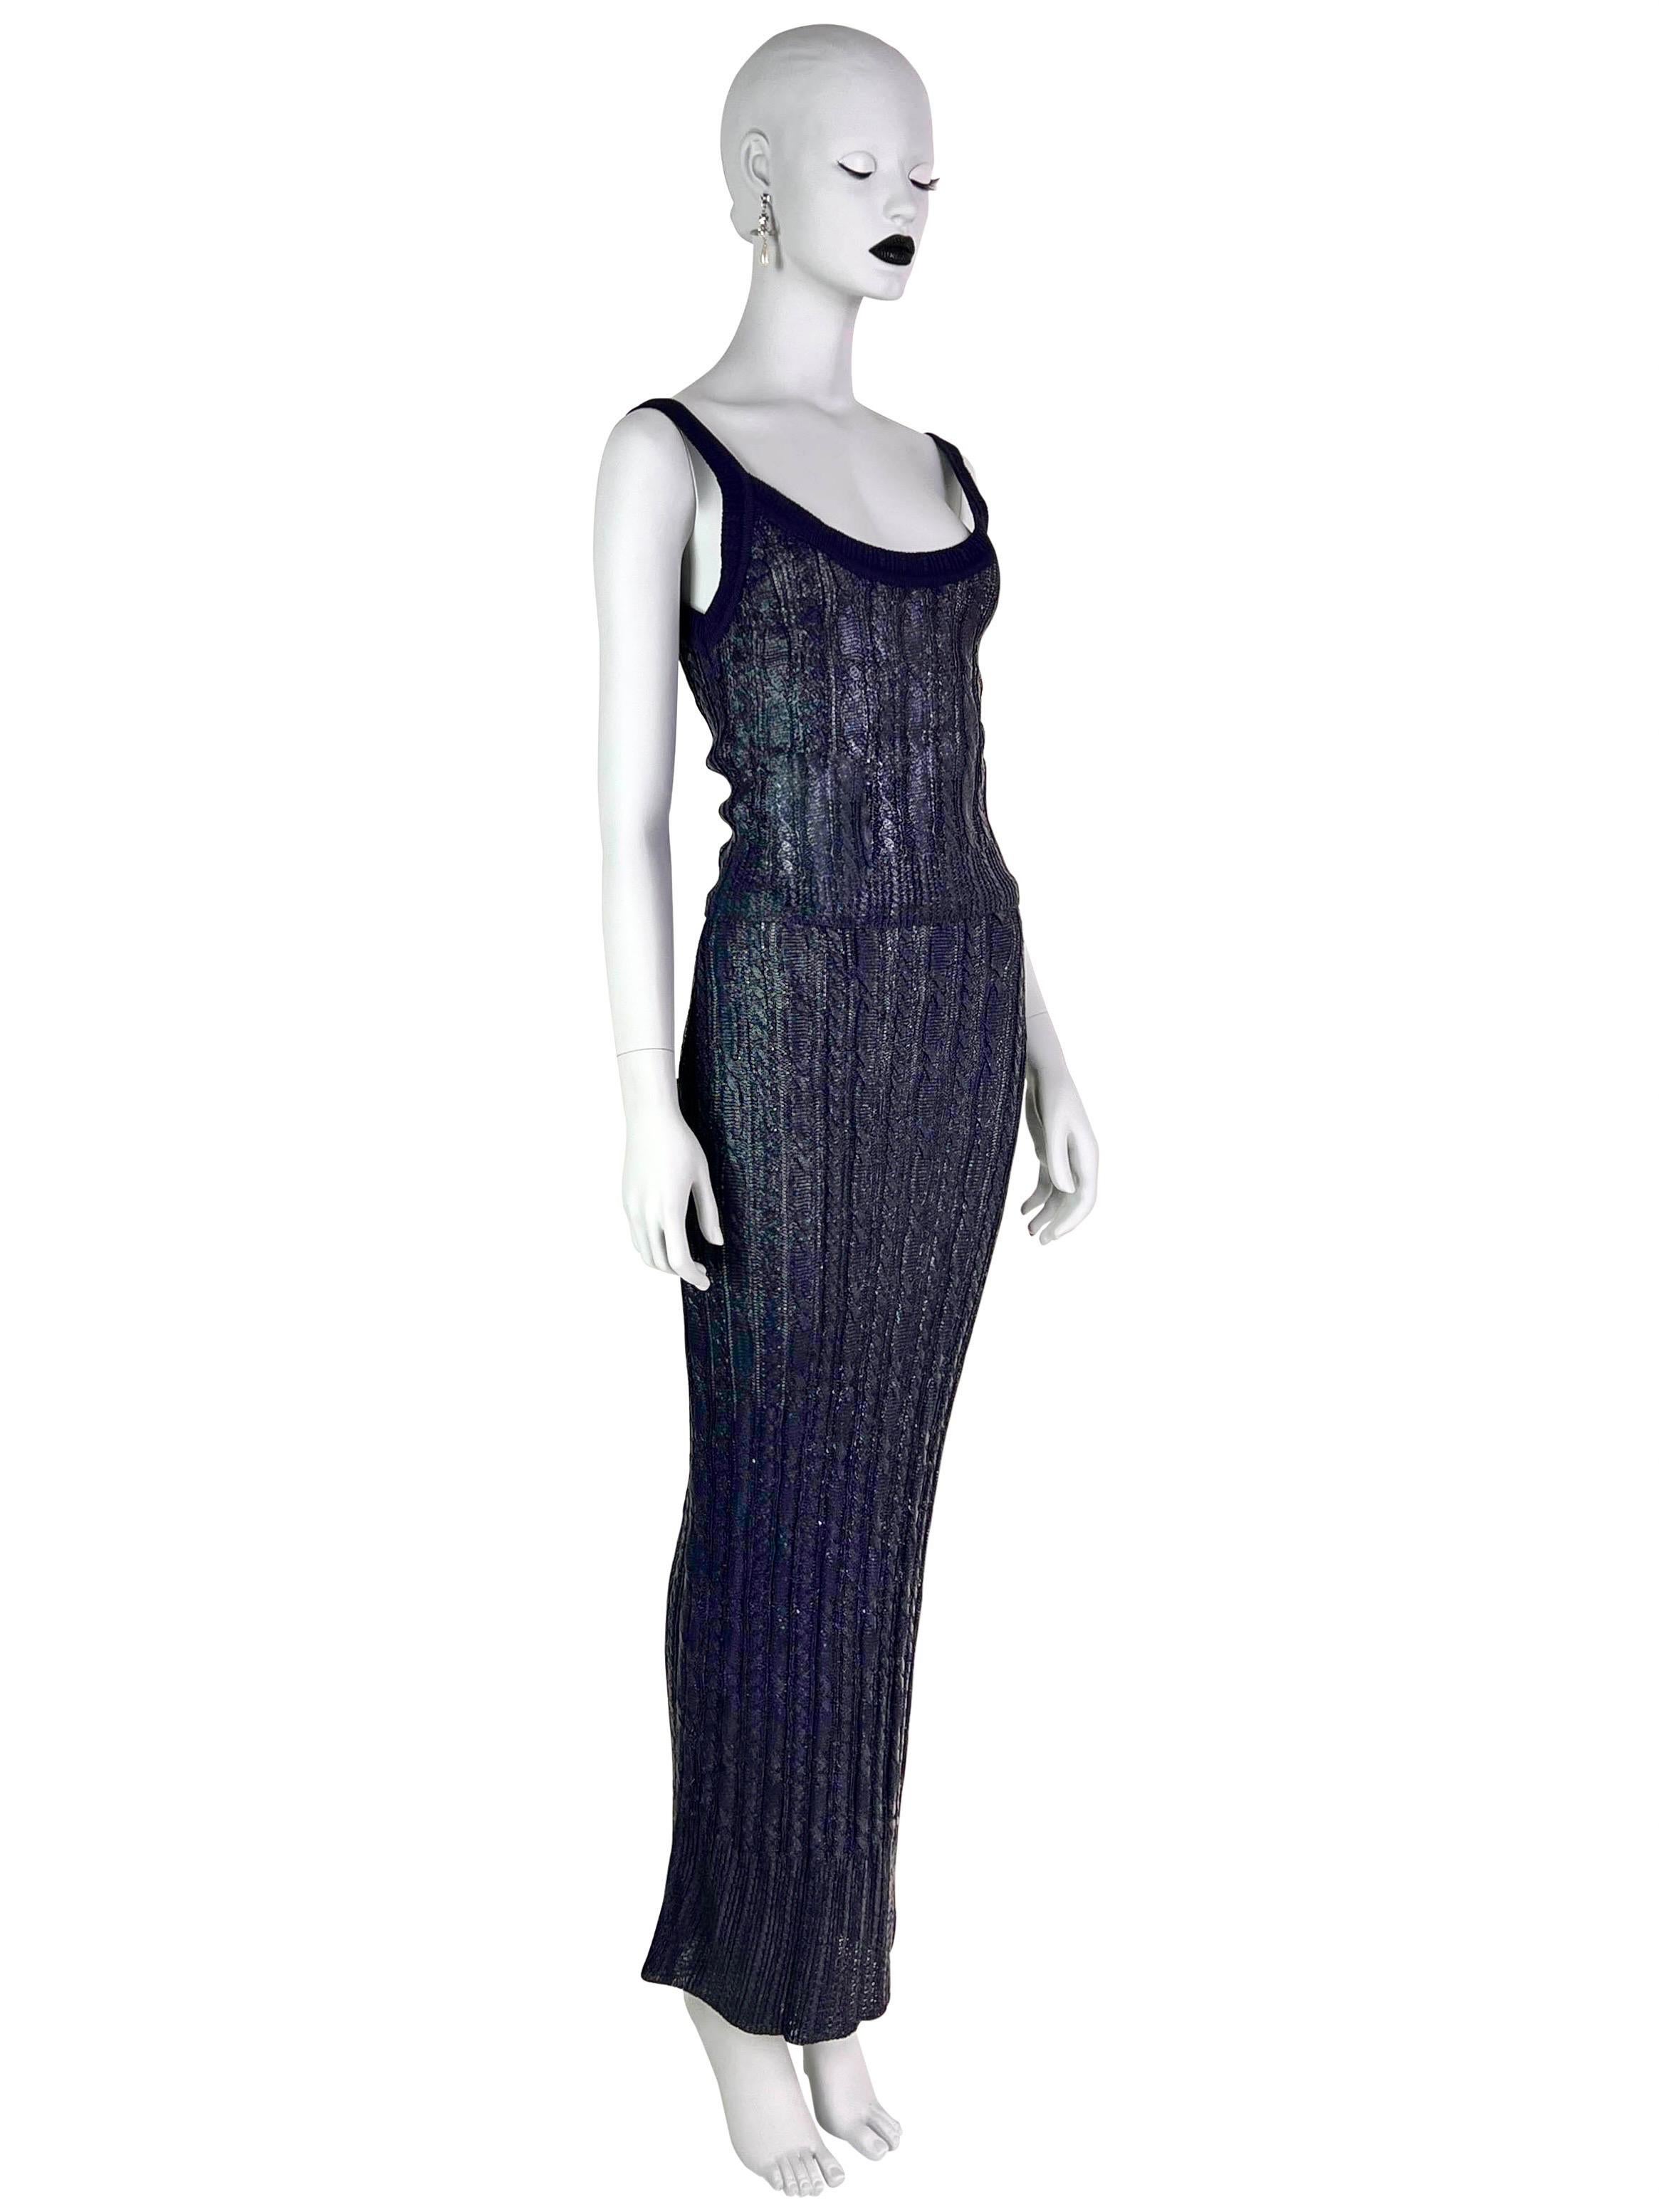 SS 1999 Dior by John Galliano RTW Rubber Knit 3-pieces ensemble In Good Condition For Sale In Prague, CZ